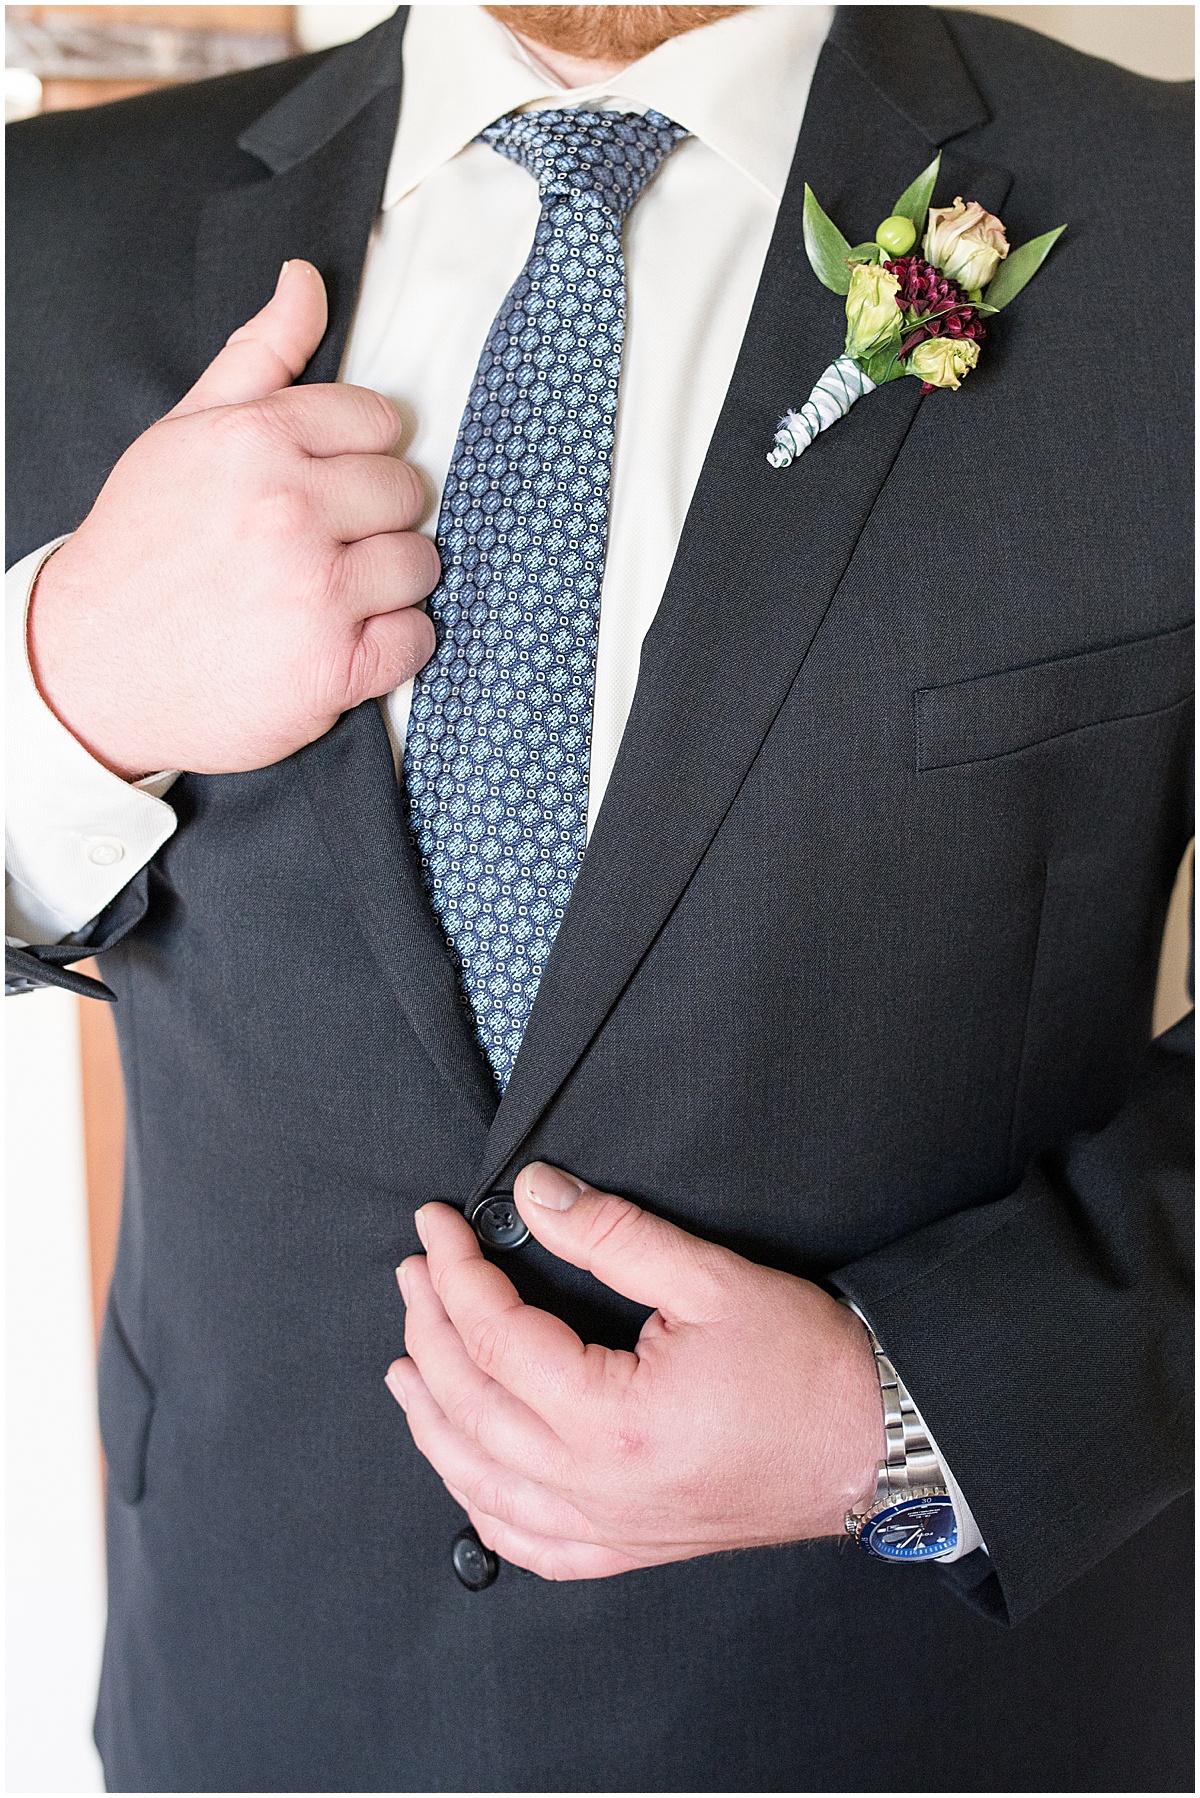 Groom getting ready photos at Meadow Springs Manor wedding in Francesville, Indiana